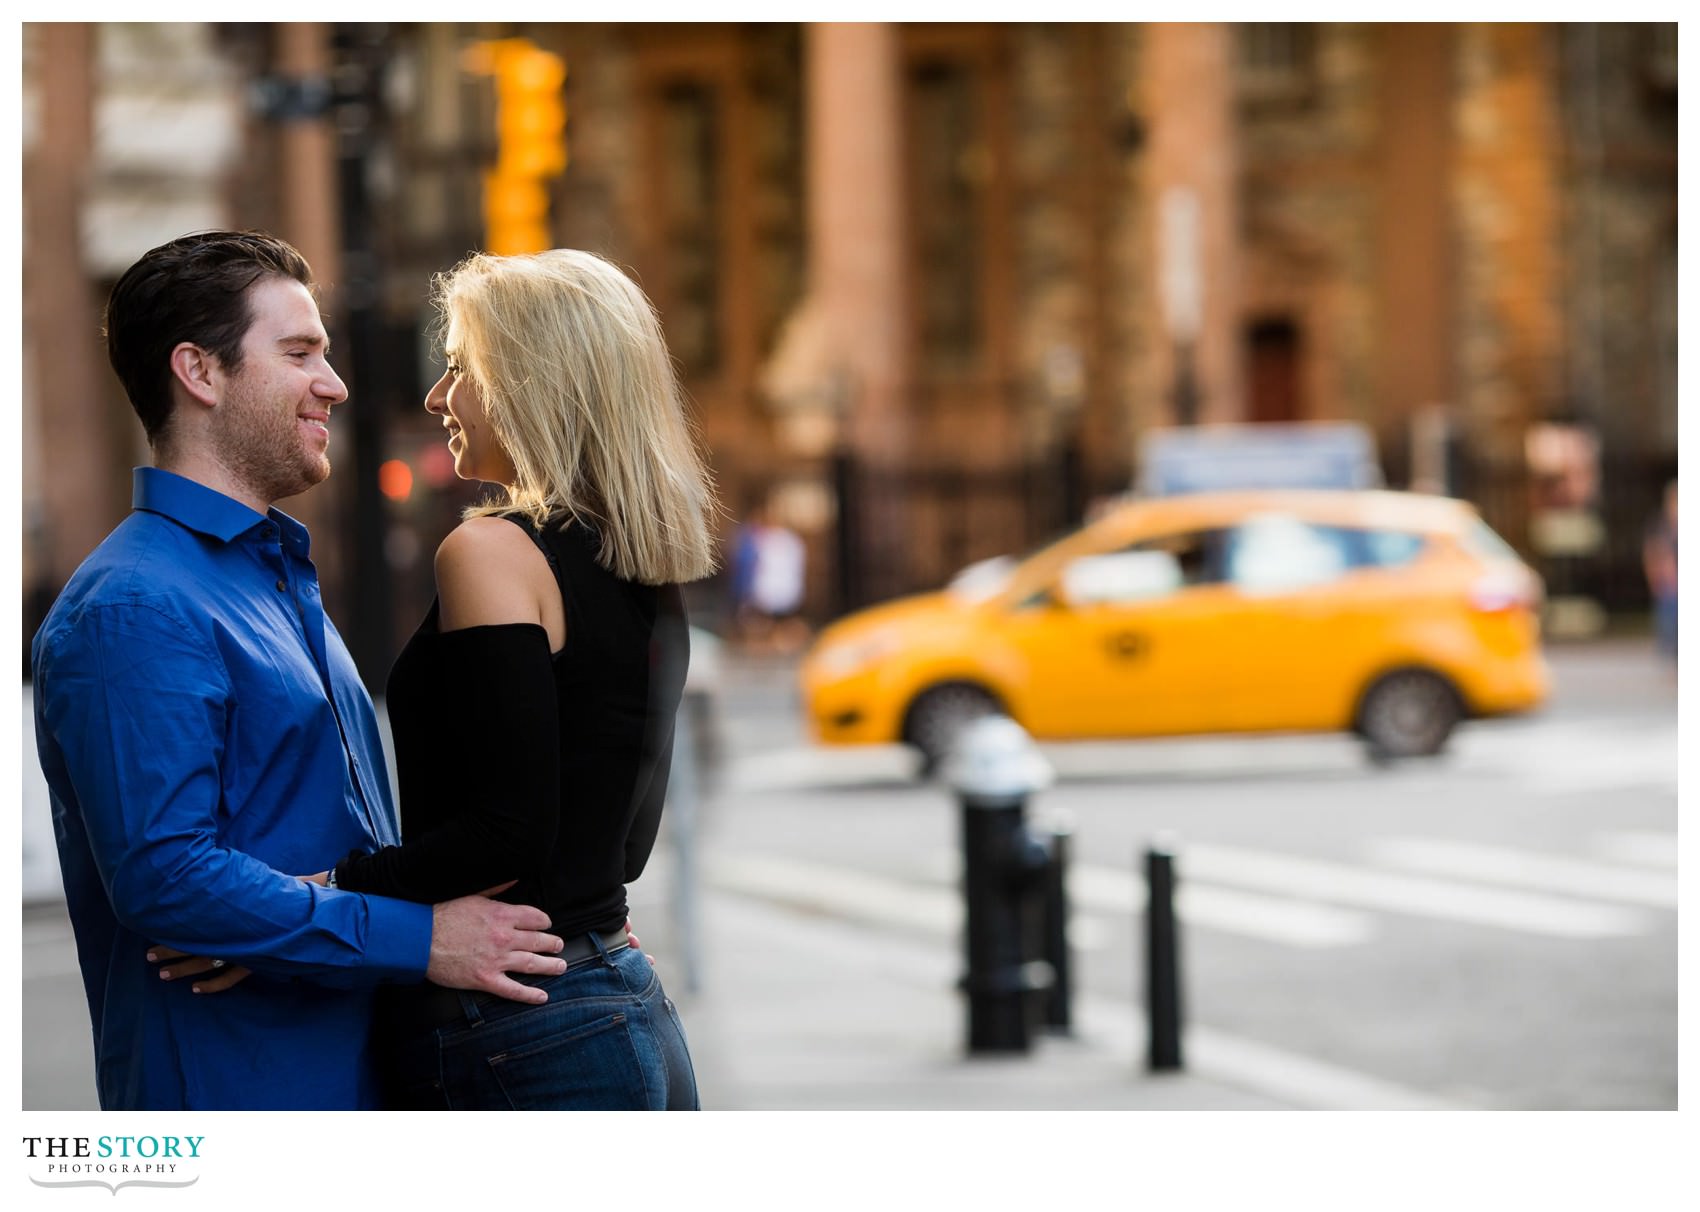 Park Row engagement photo with NYC taxi in background